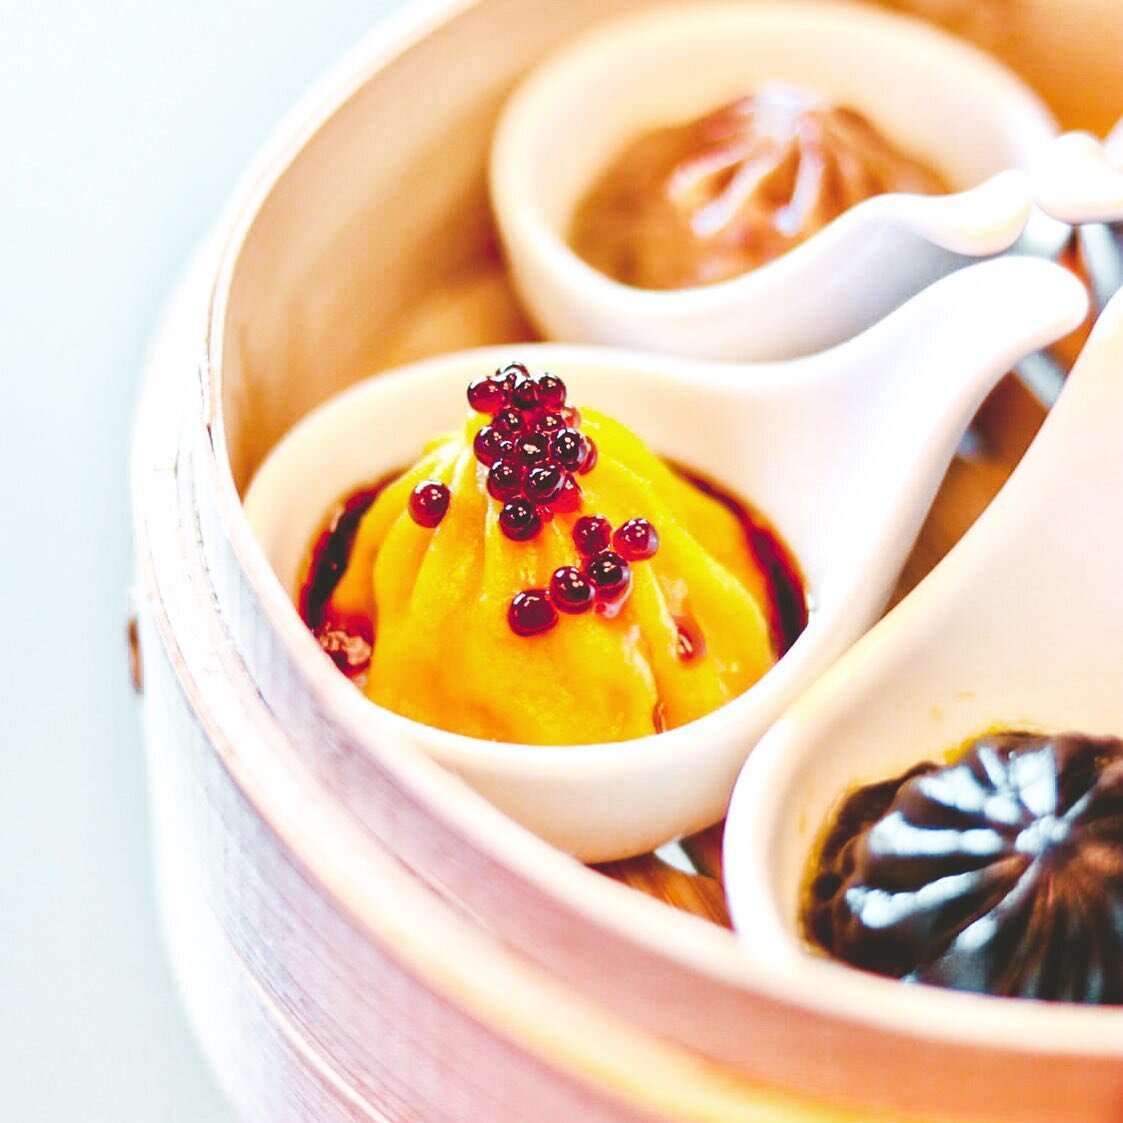 Our Xiao Long Bao come with vinegar agar, pour some over your dumplings and watch them melt!
-
Picture by @akemi.eats 
-
@paletteteagarden 
48 Hillsdale Mall
San Mateo, CA 94403
650.769.8888